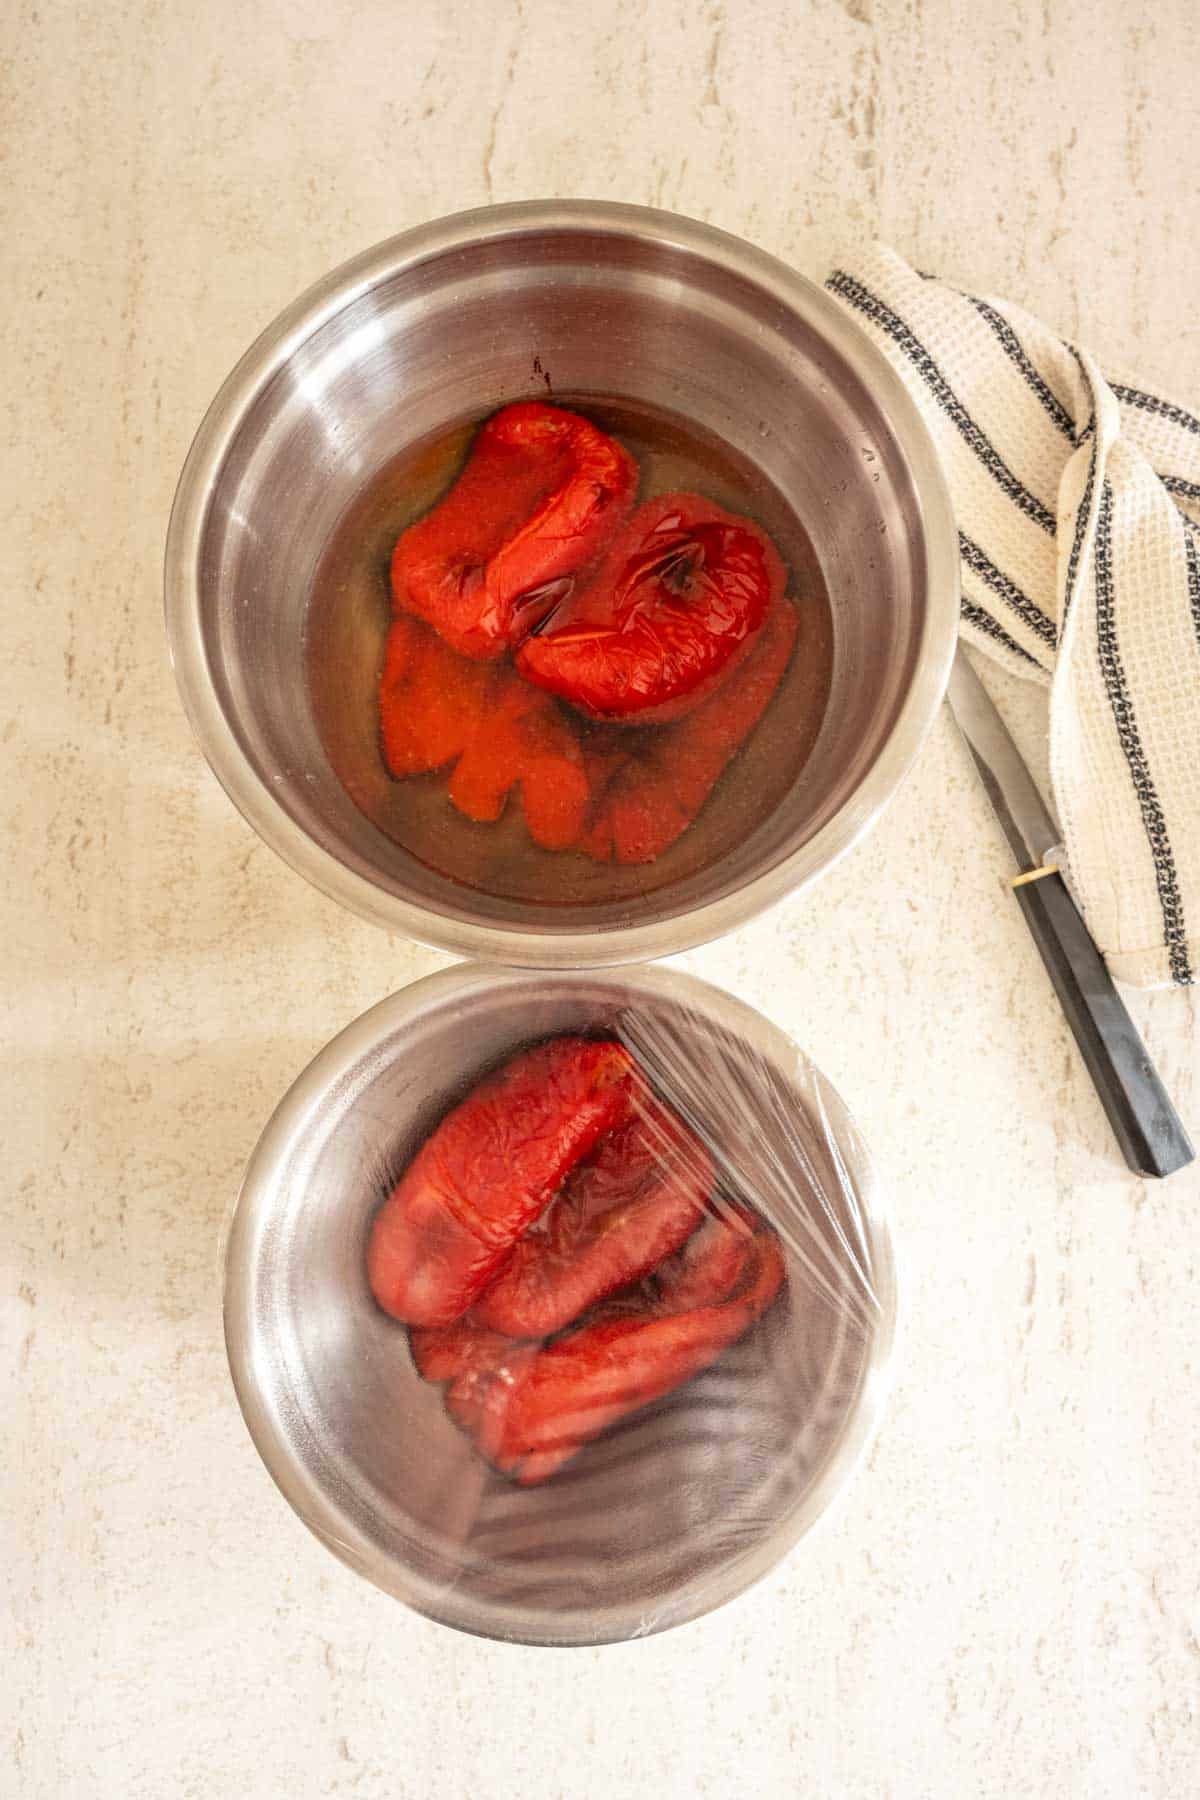 Two stainless steel bowls on a countertop containing roasted red peppers.